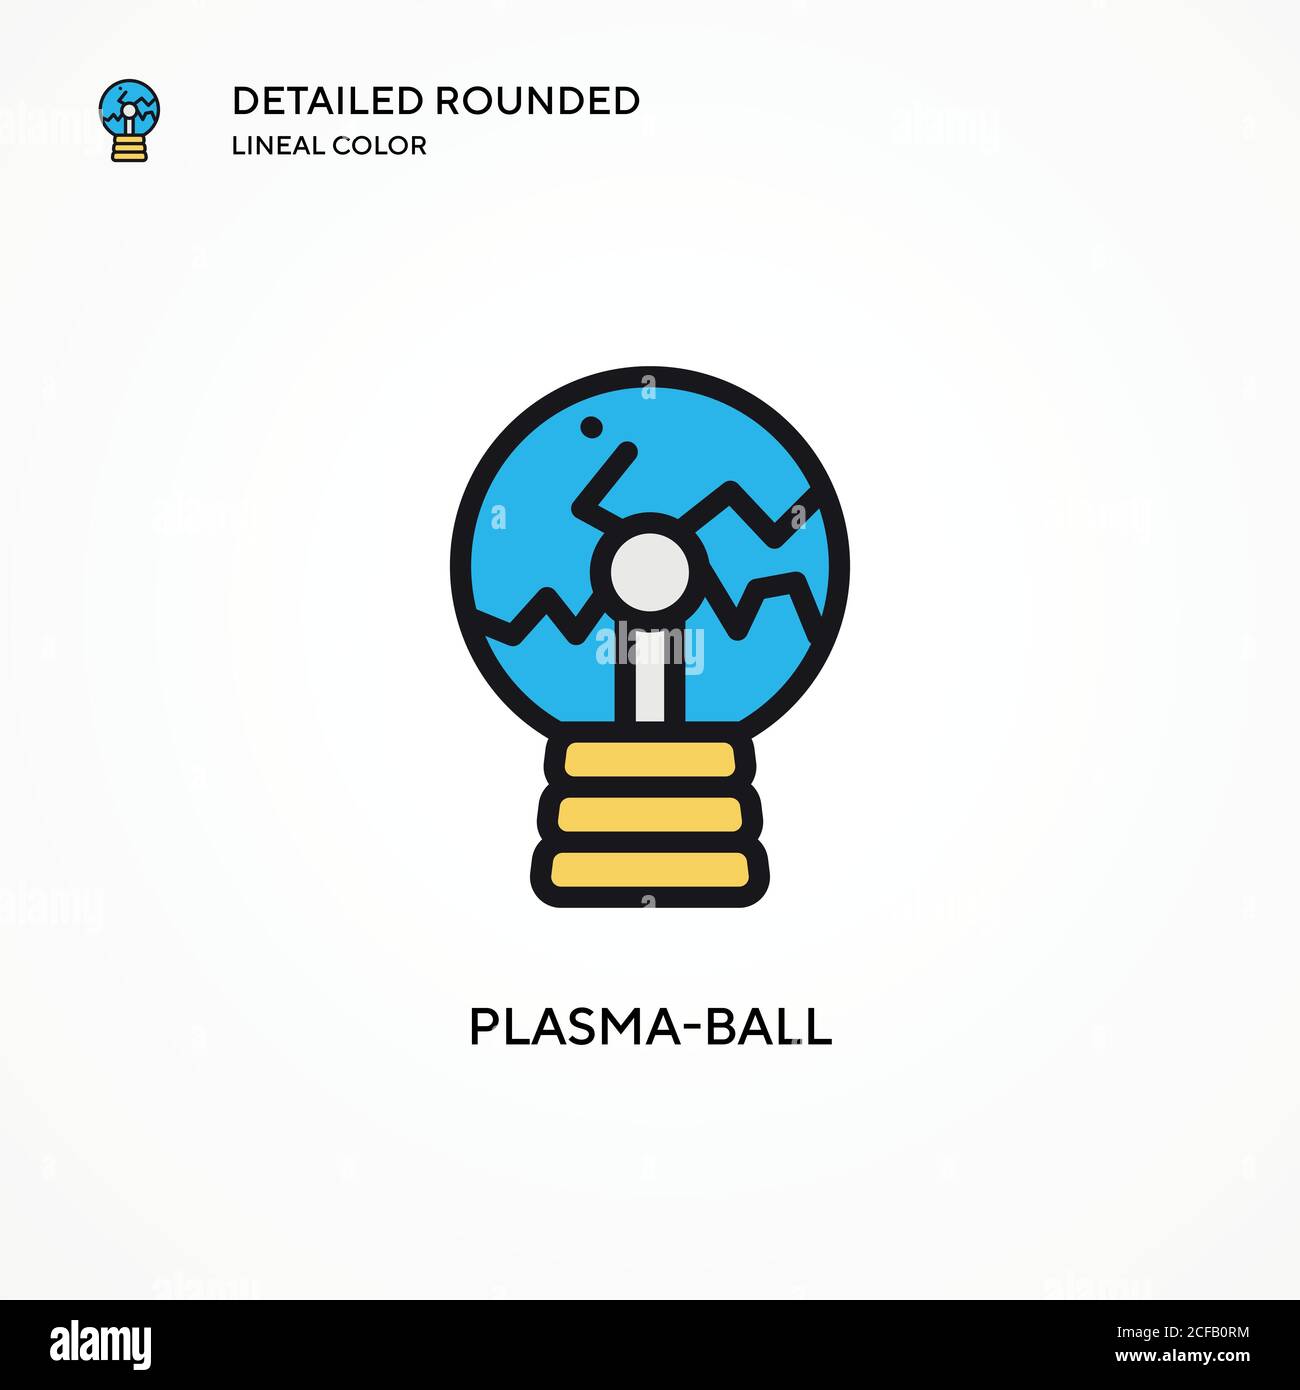 Plasma-ball vector icon. Modern vector illustration concepts. Easy to edit and customize. Stock Vector